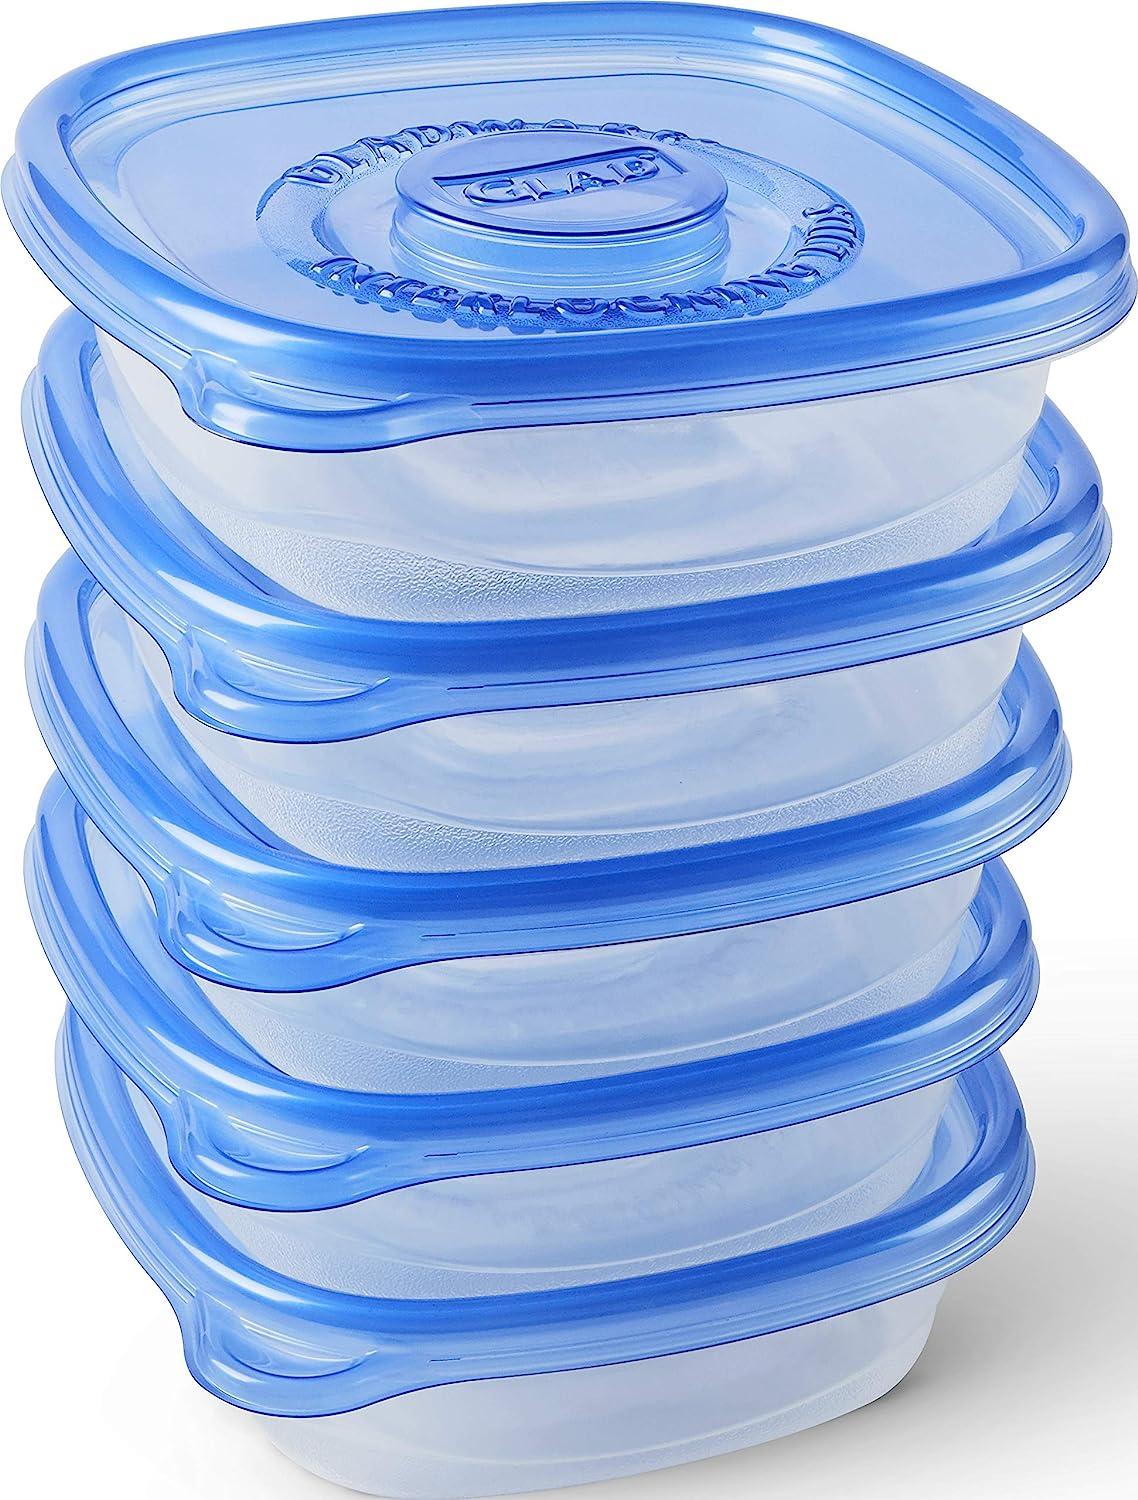 Glad FreezerWare Food Storage Containers, Large - 2 pack